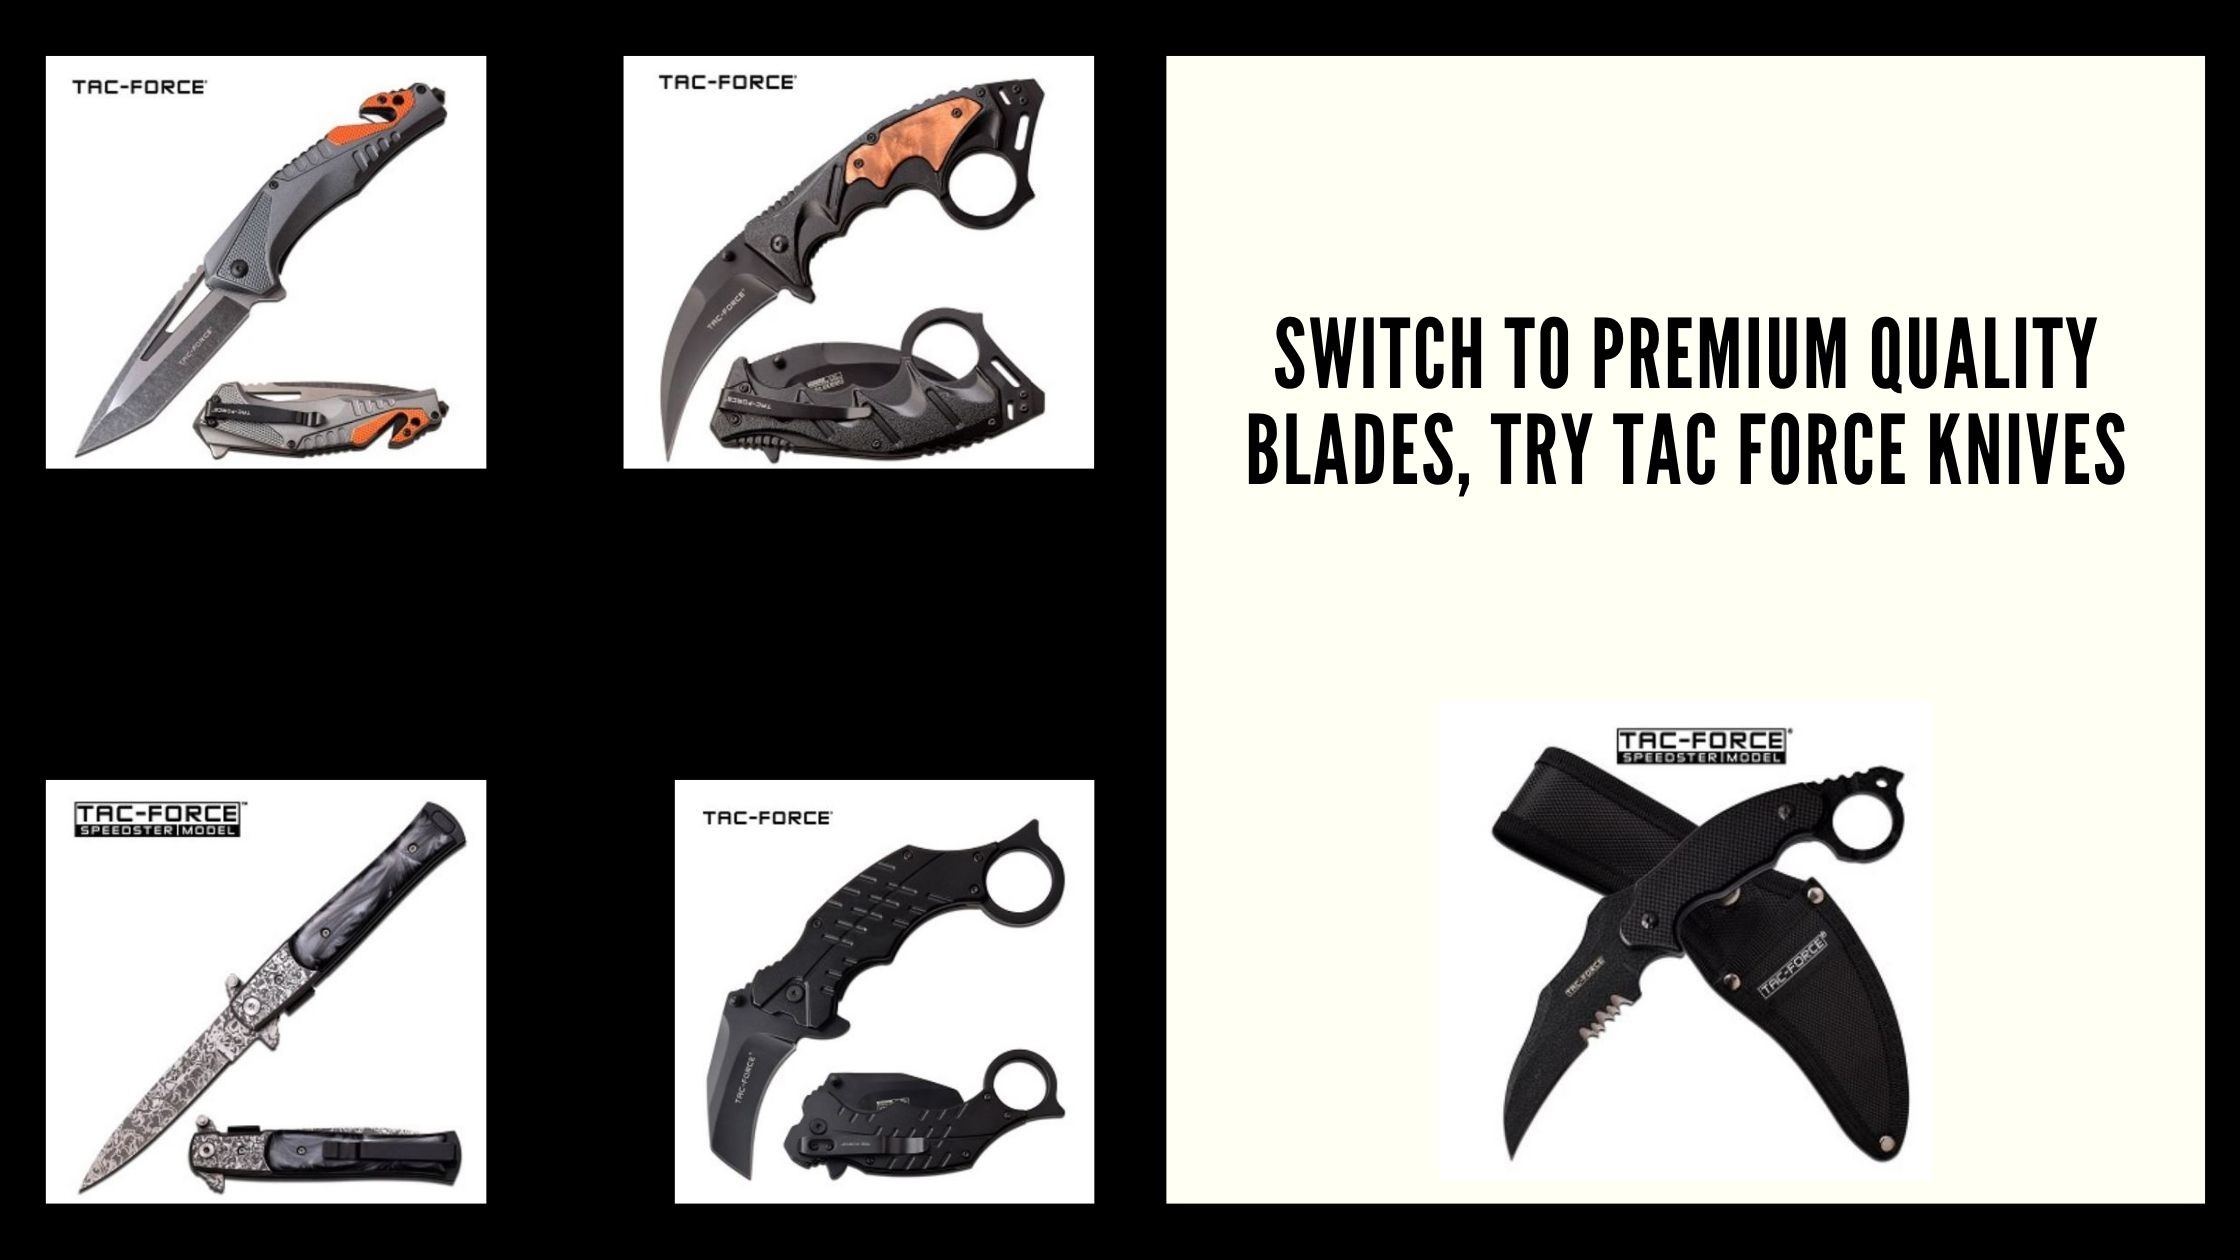 Switch to Premium Quality Blades, Try Tac Force Knives